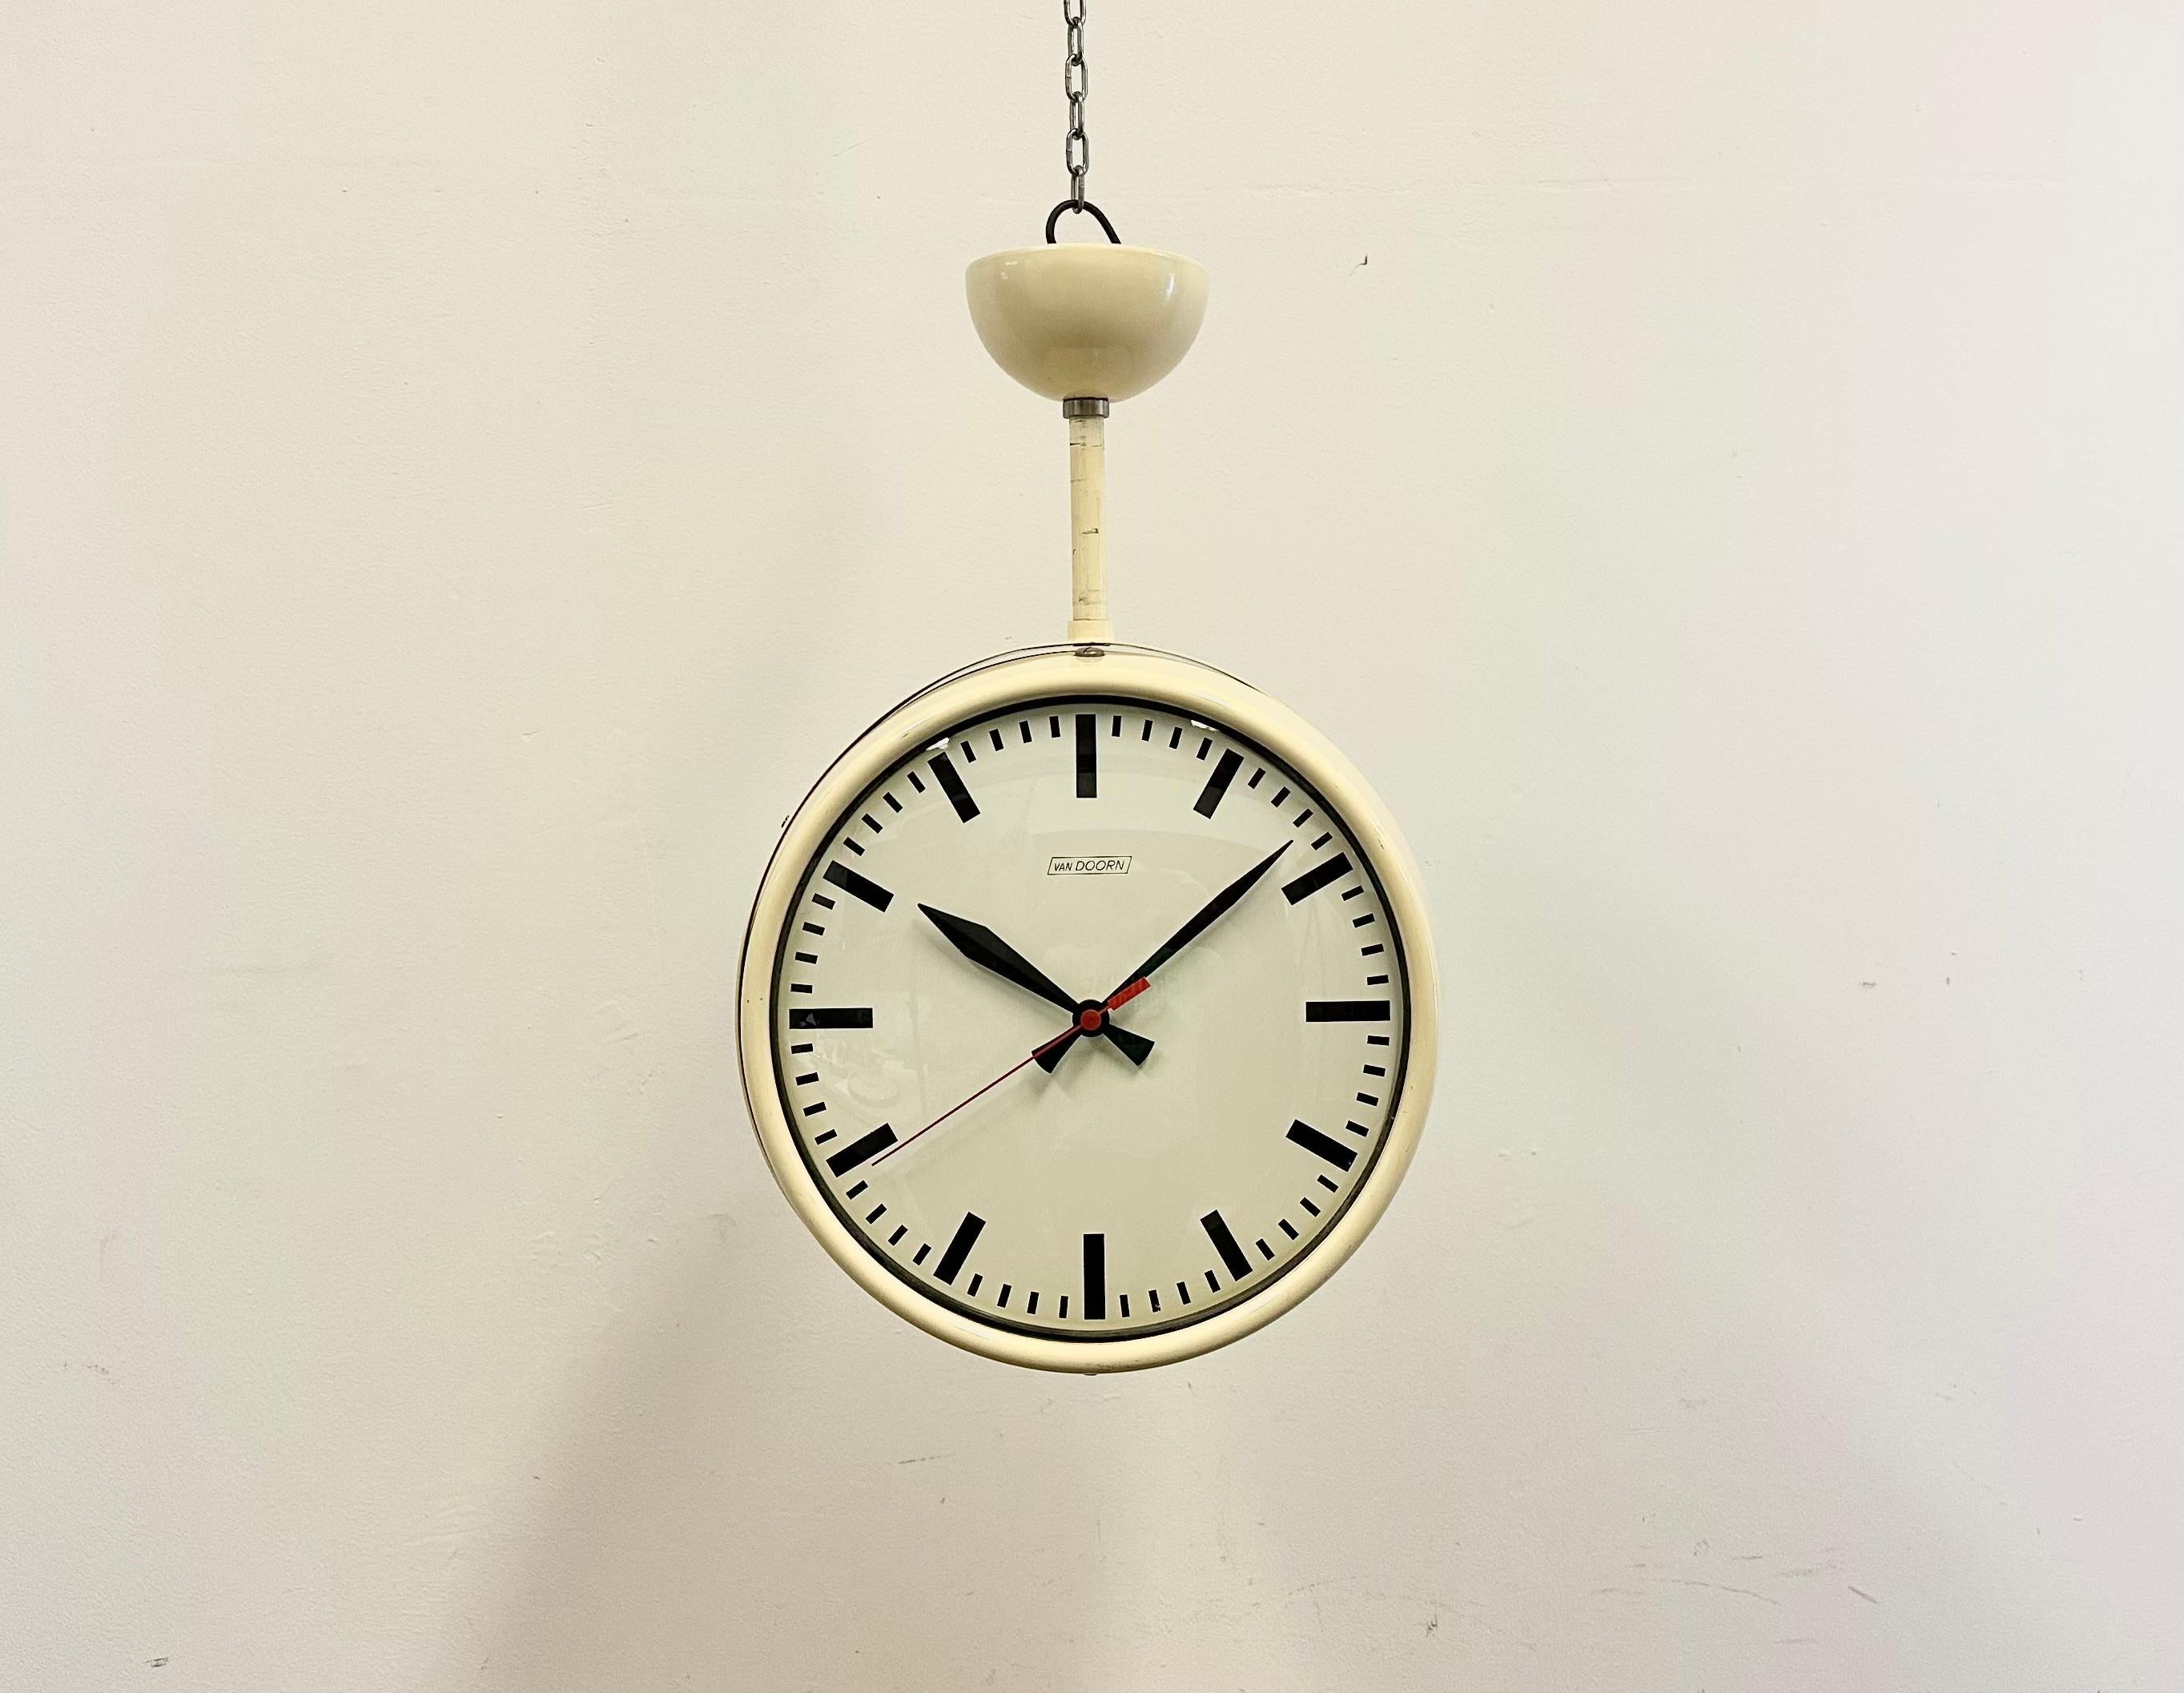 This double sided hanging ceiling clock was produced by Van Doorn in Netherlands during the 1960s. It features a beige iron body, an iron dials, an aluminum hands and a convex clear glass covers. The piece has been converted into a battery-powered